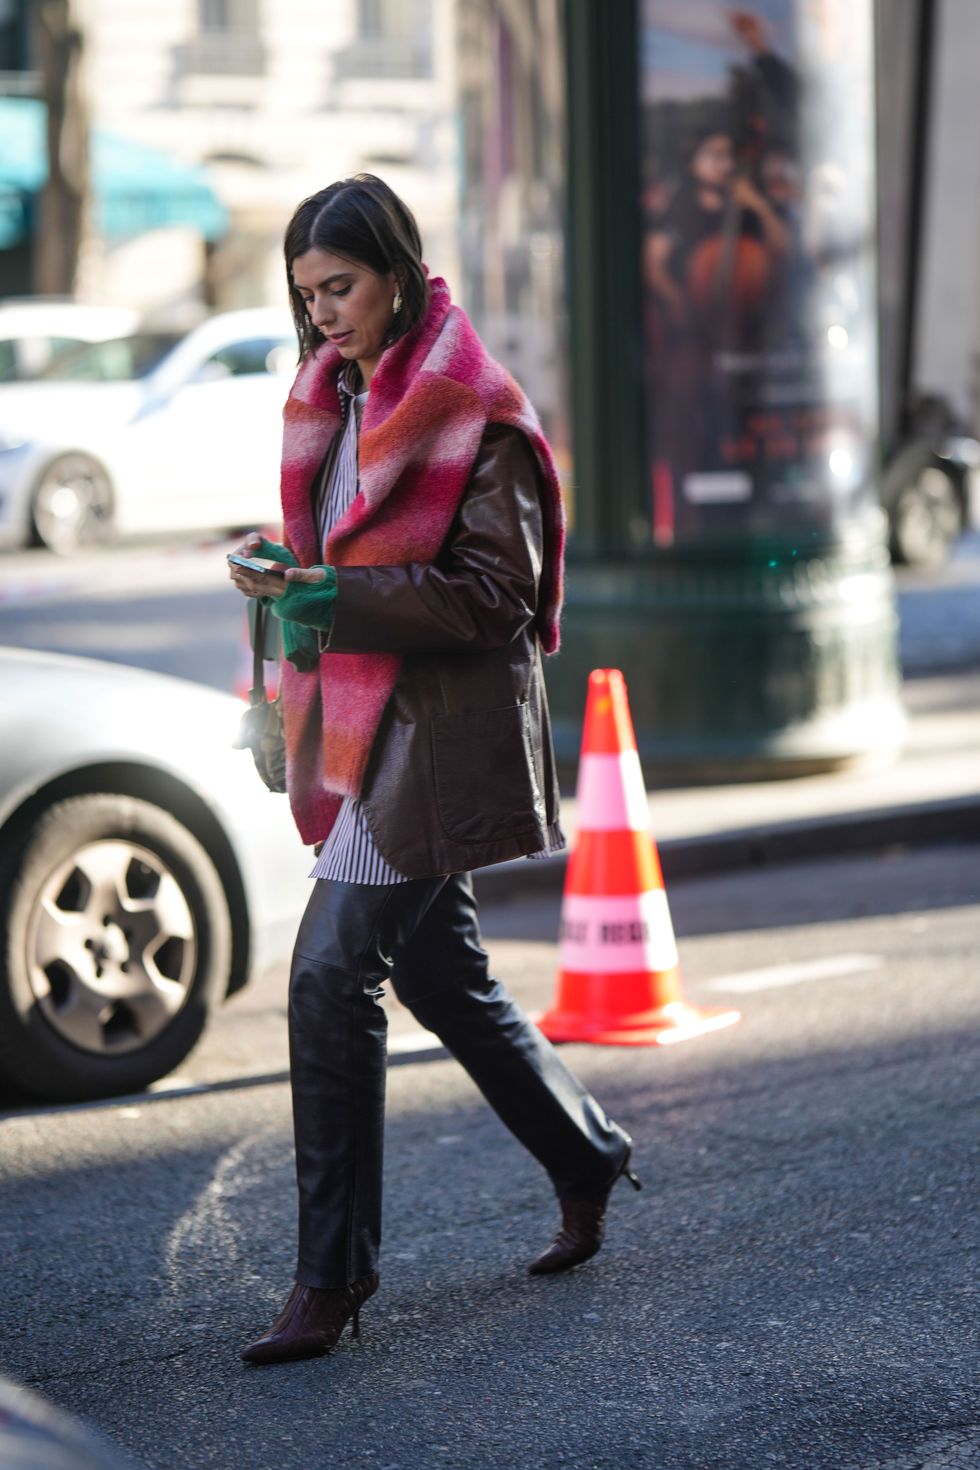 a woman in a pink coat walking on the street